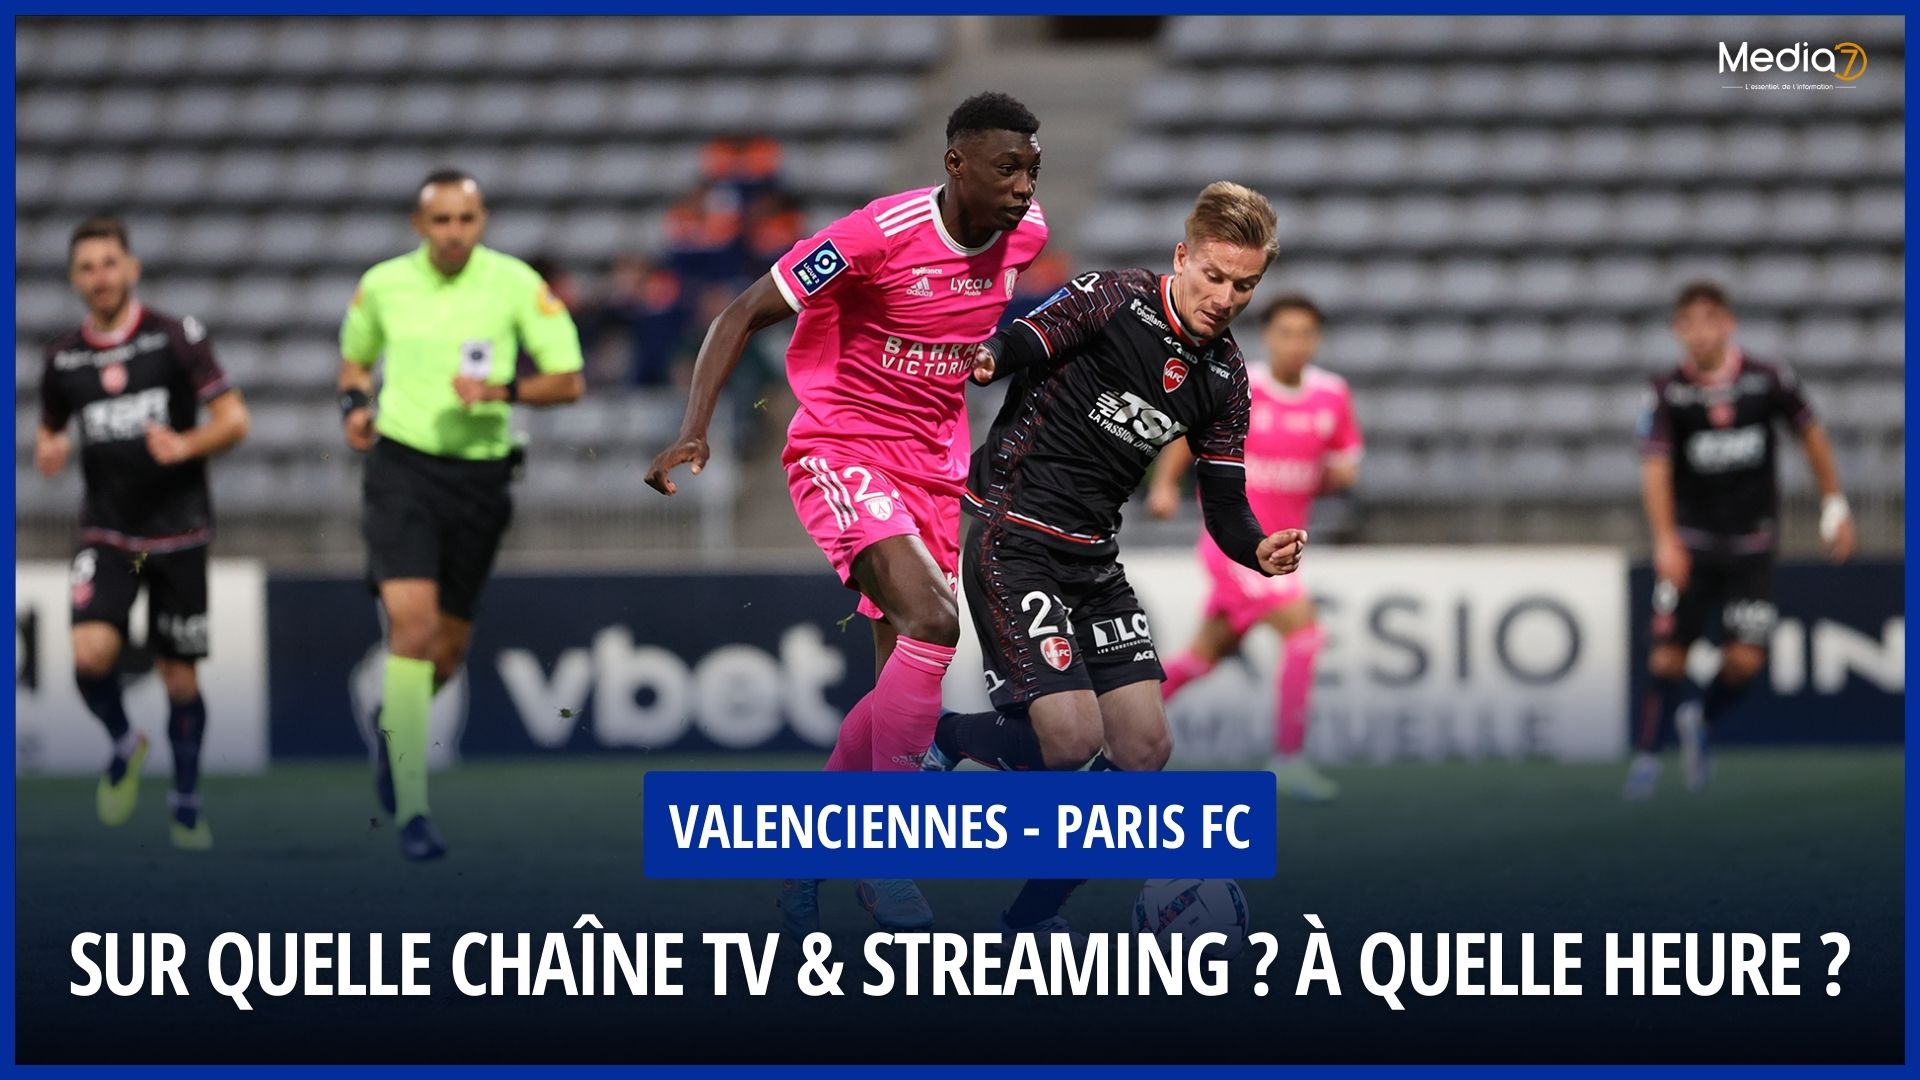 Valenciennes - Paris FC match live: On which TV & streaming channel? At what time ? - Media7